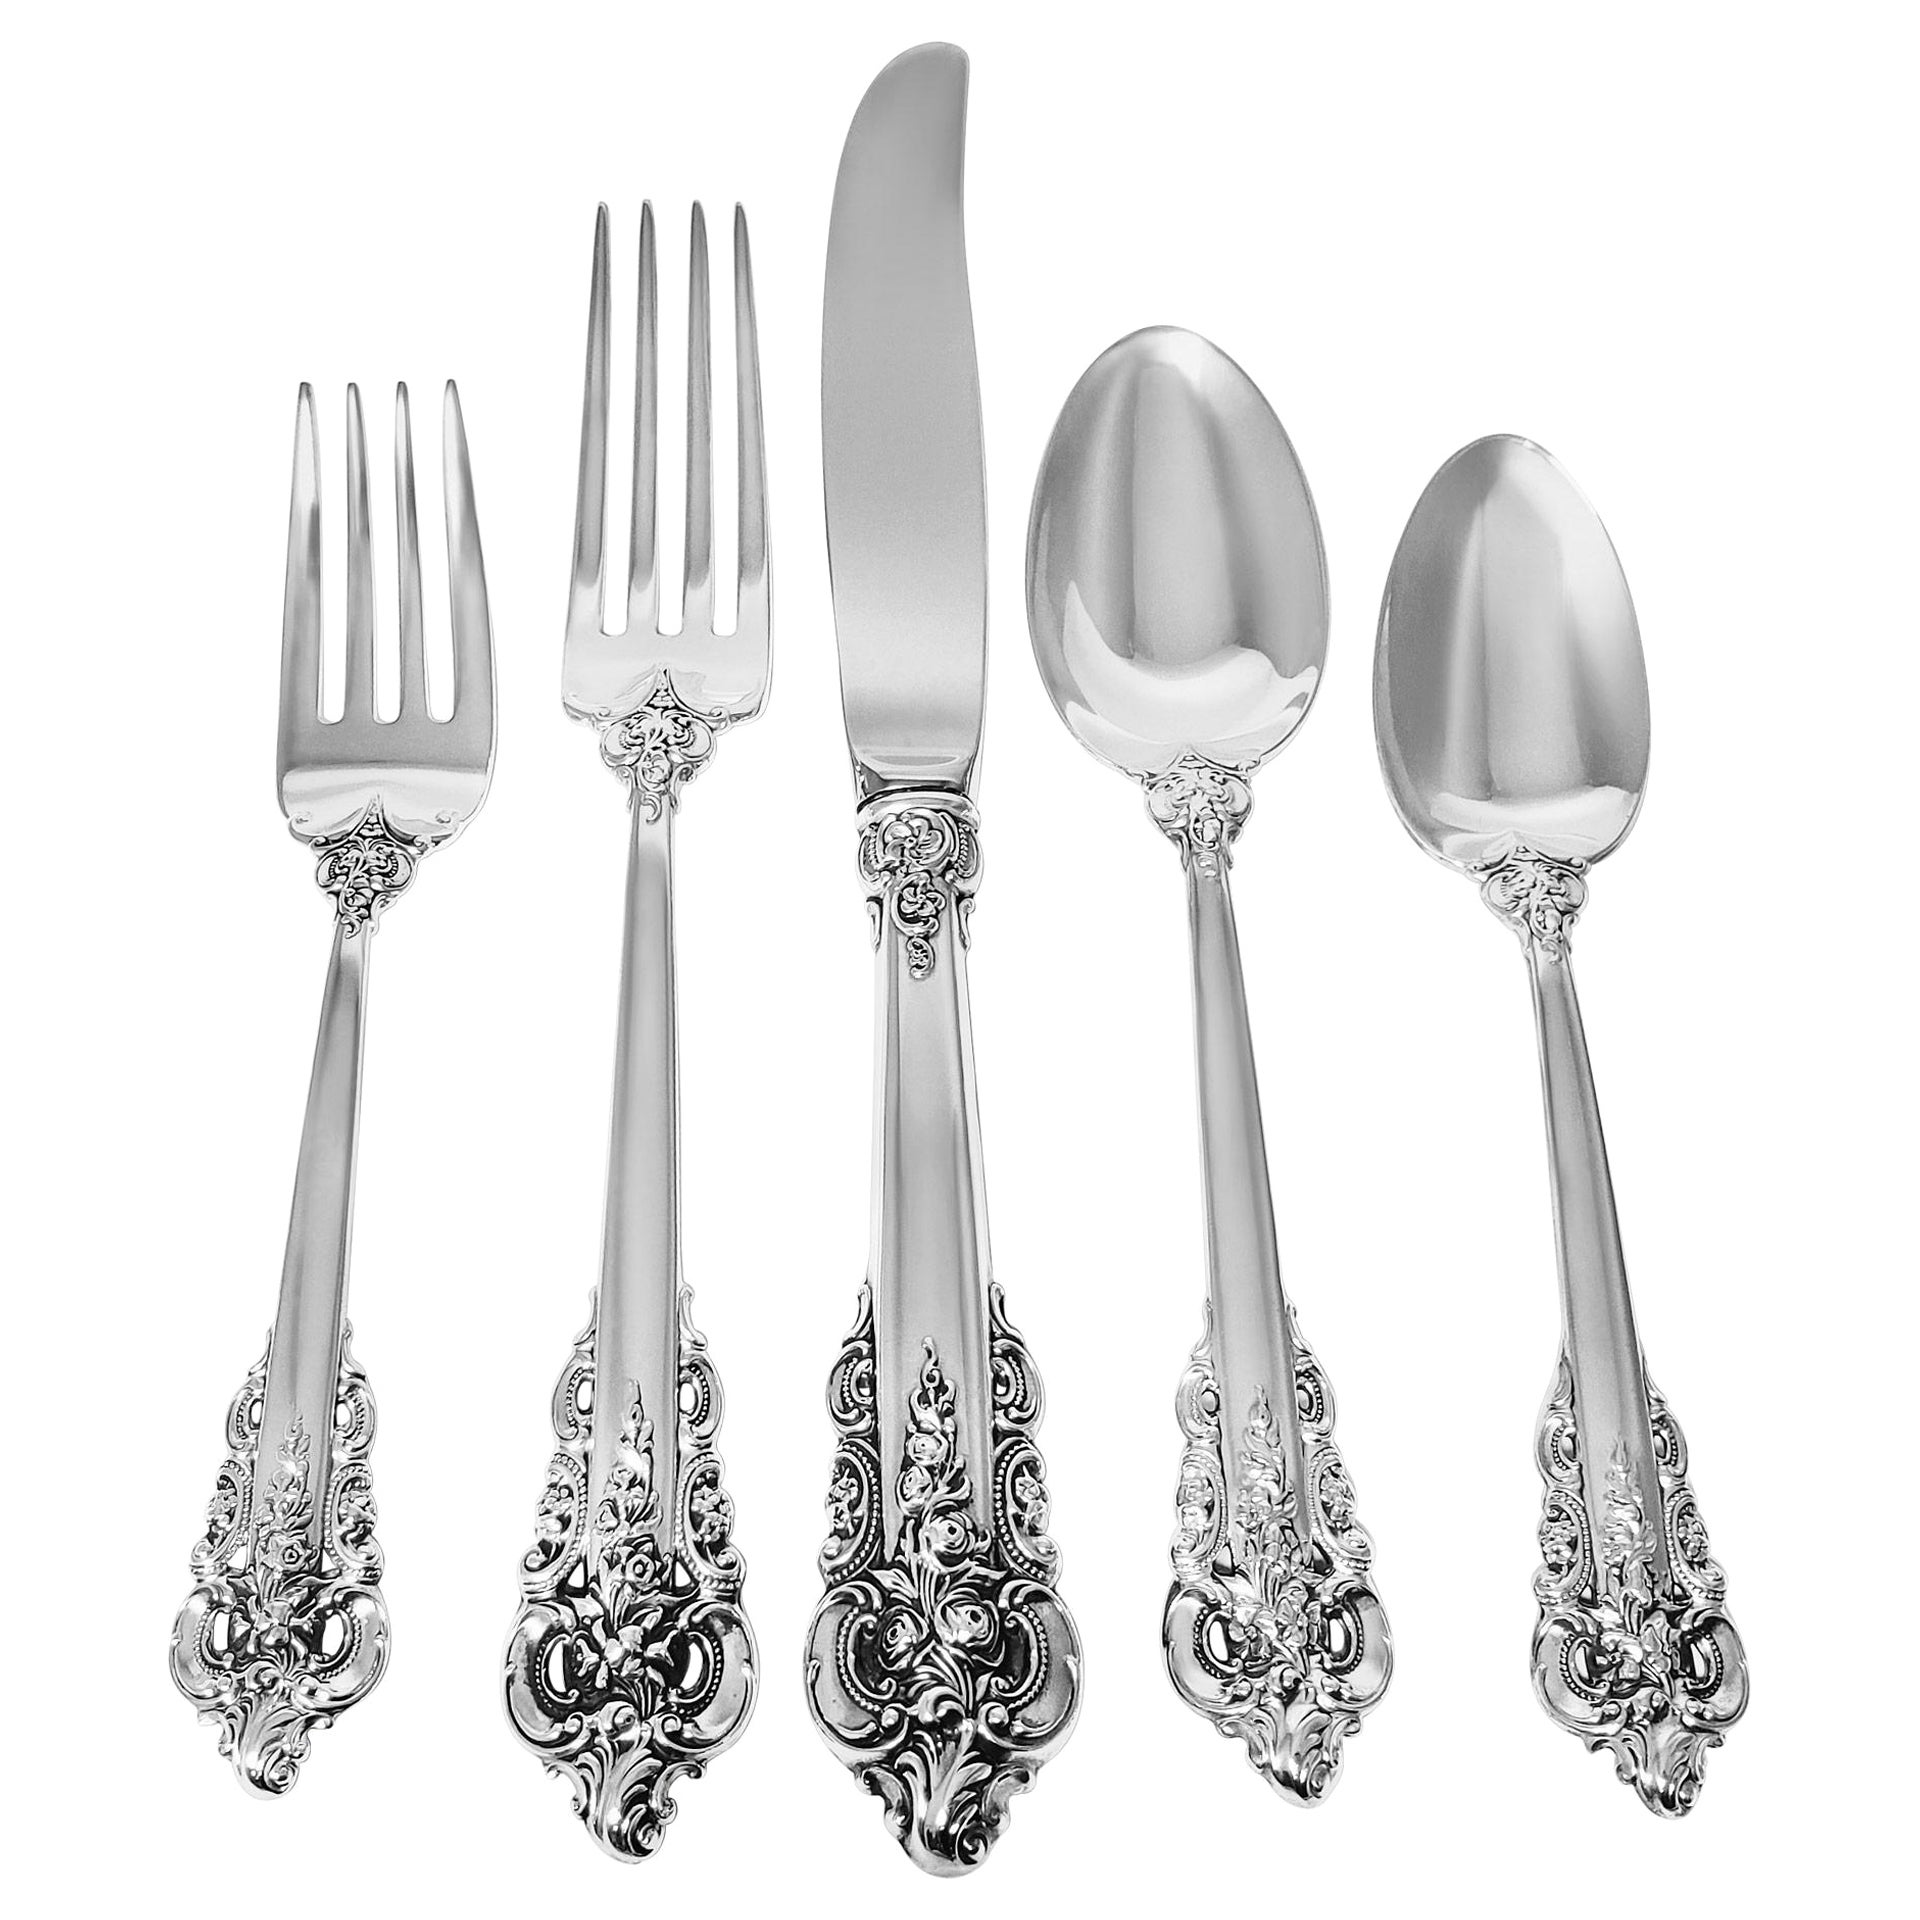 Sterling Silver Flatware Set Grande Baroque Patented by Wallace in 1941, 5 Place